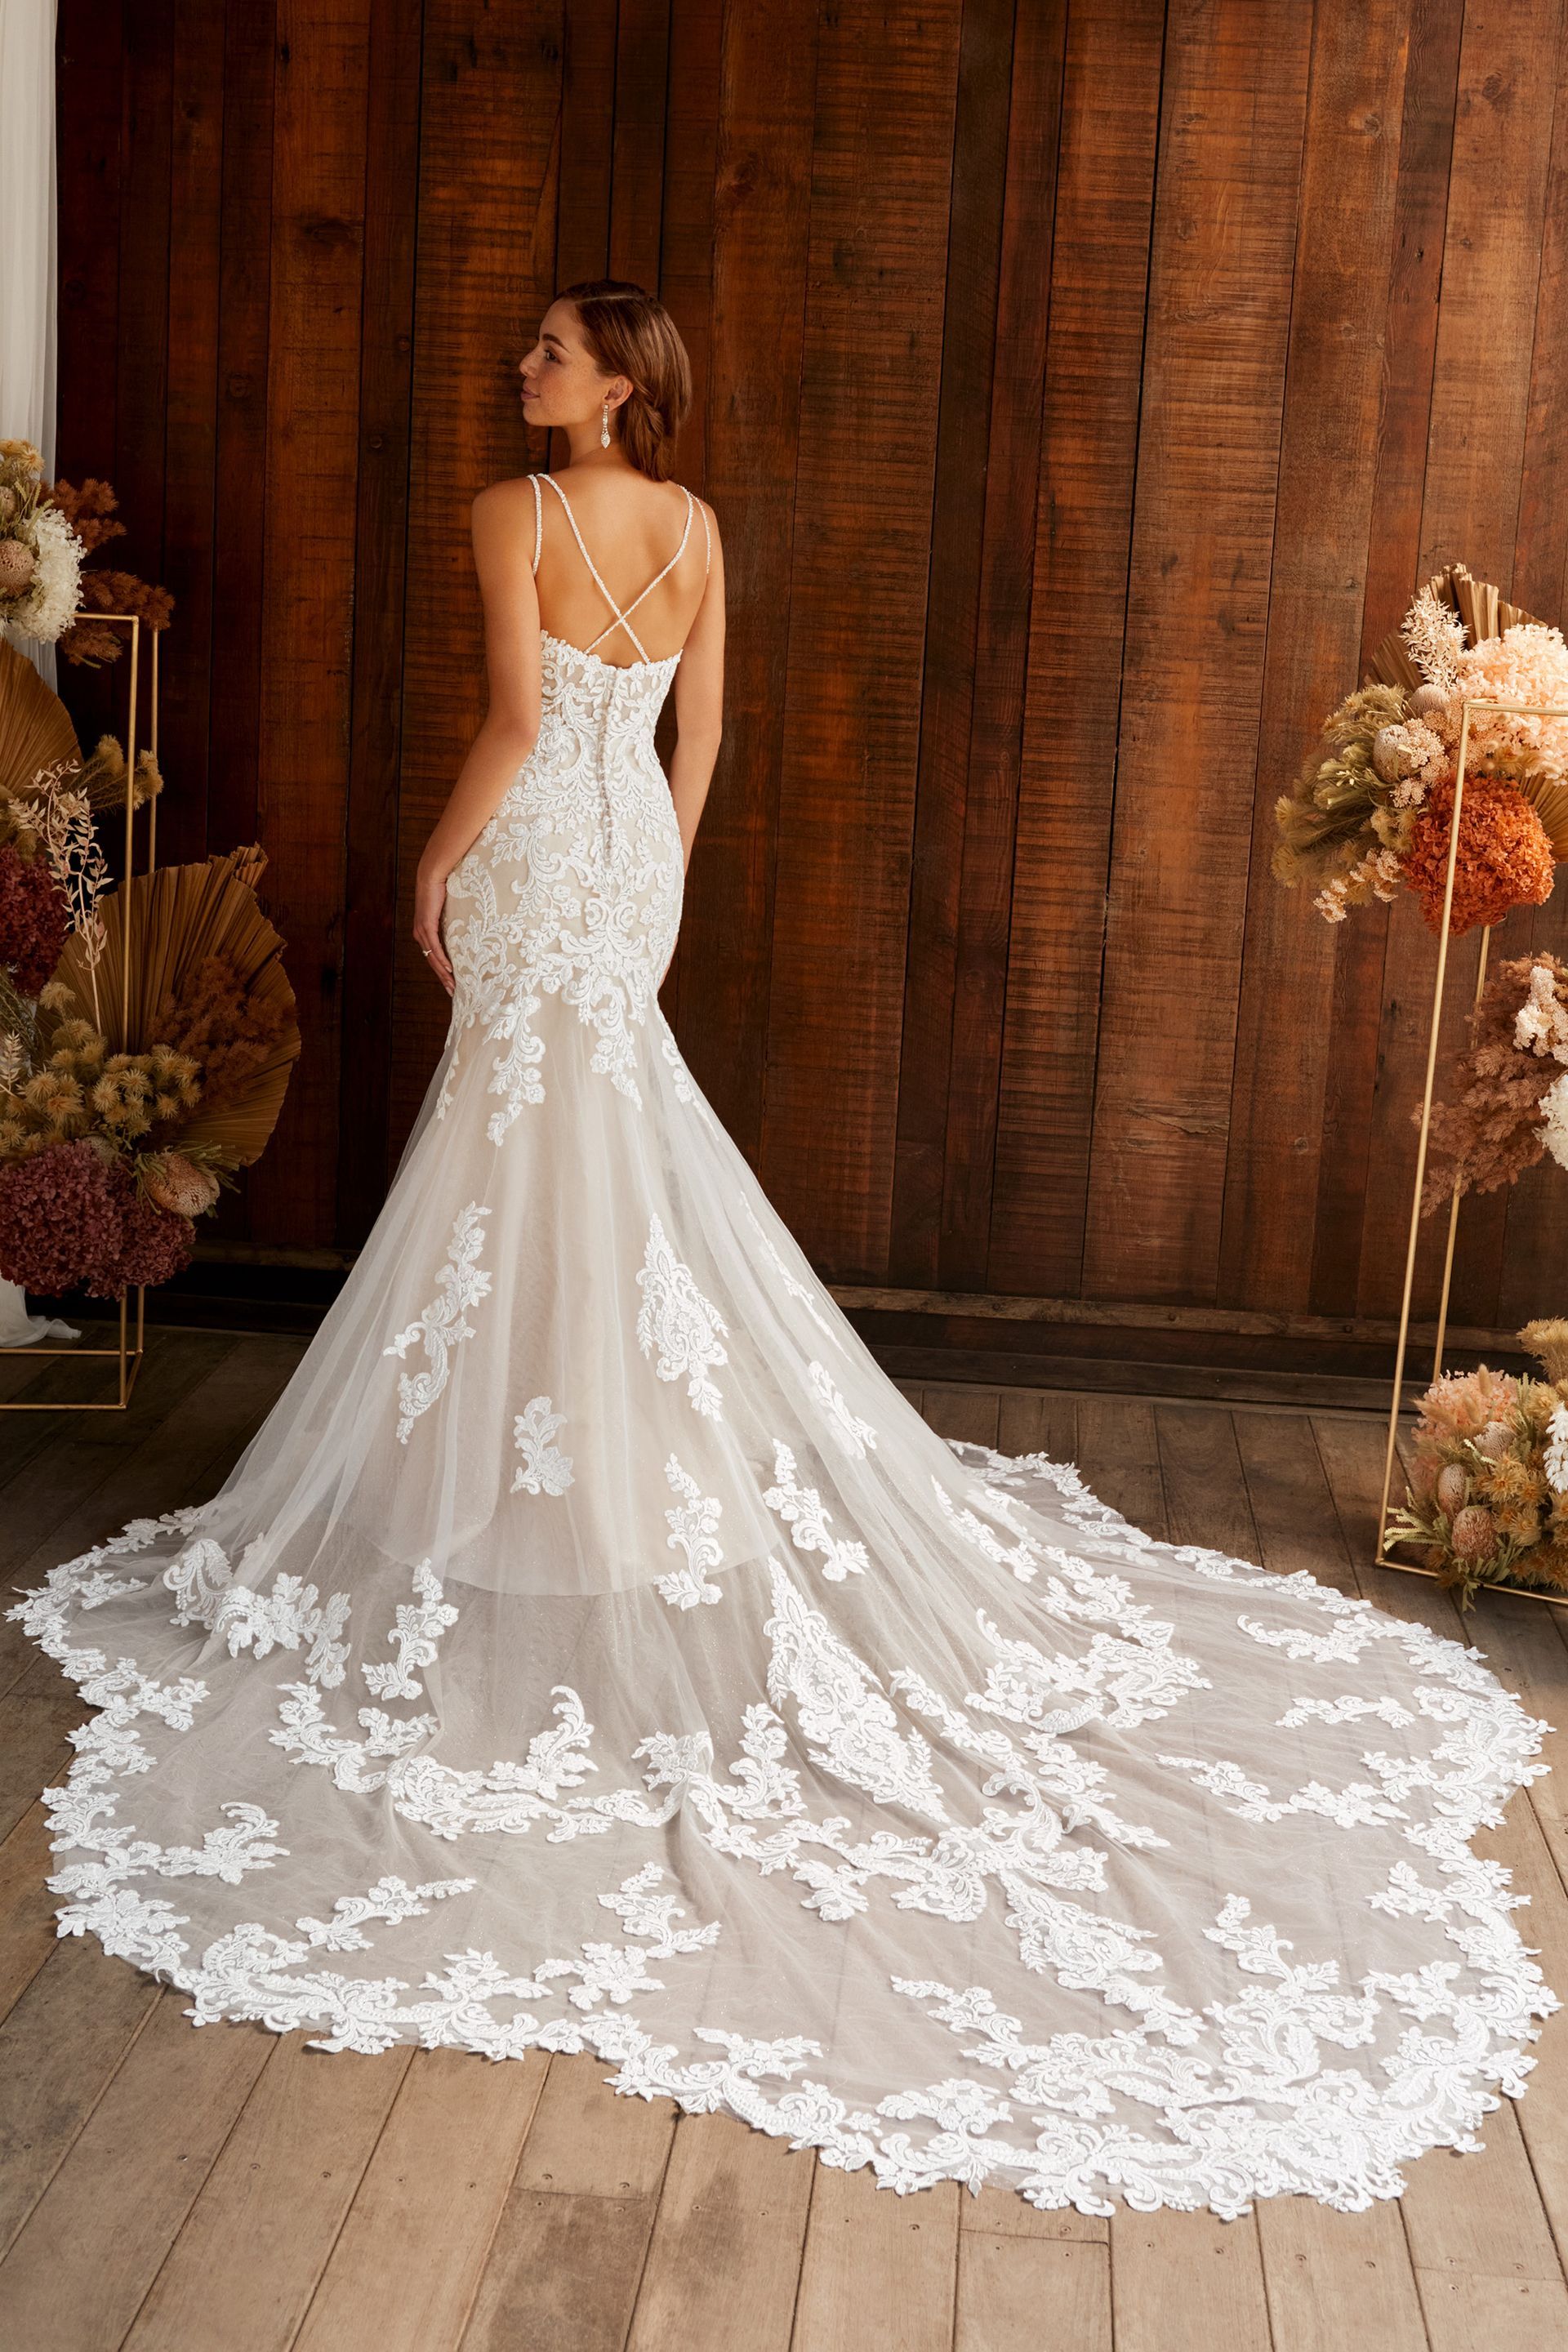 The back of a wedding dress with a long train is shown.